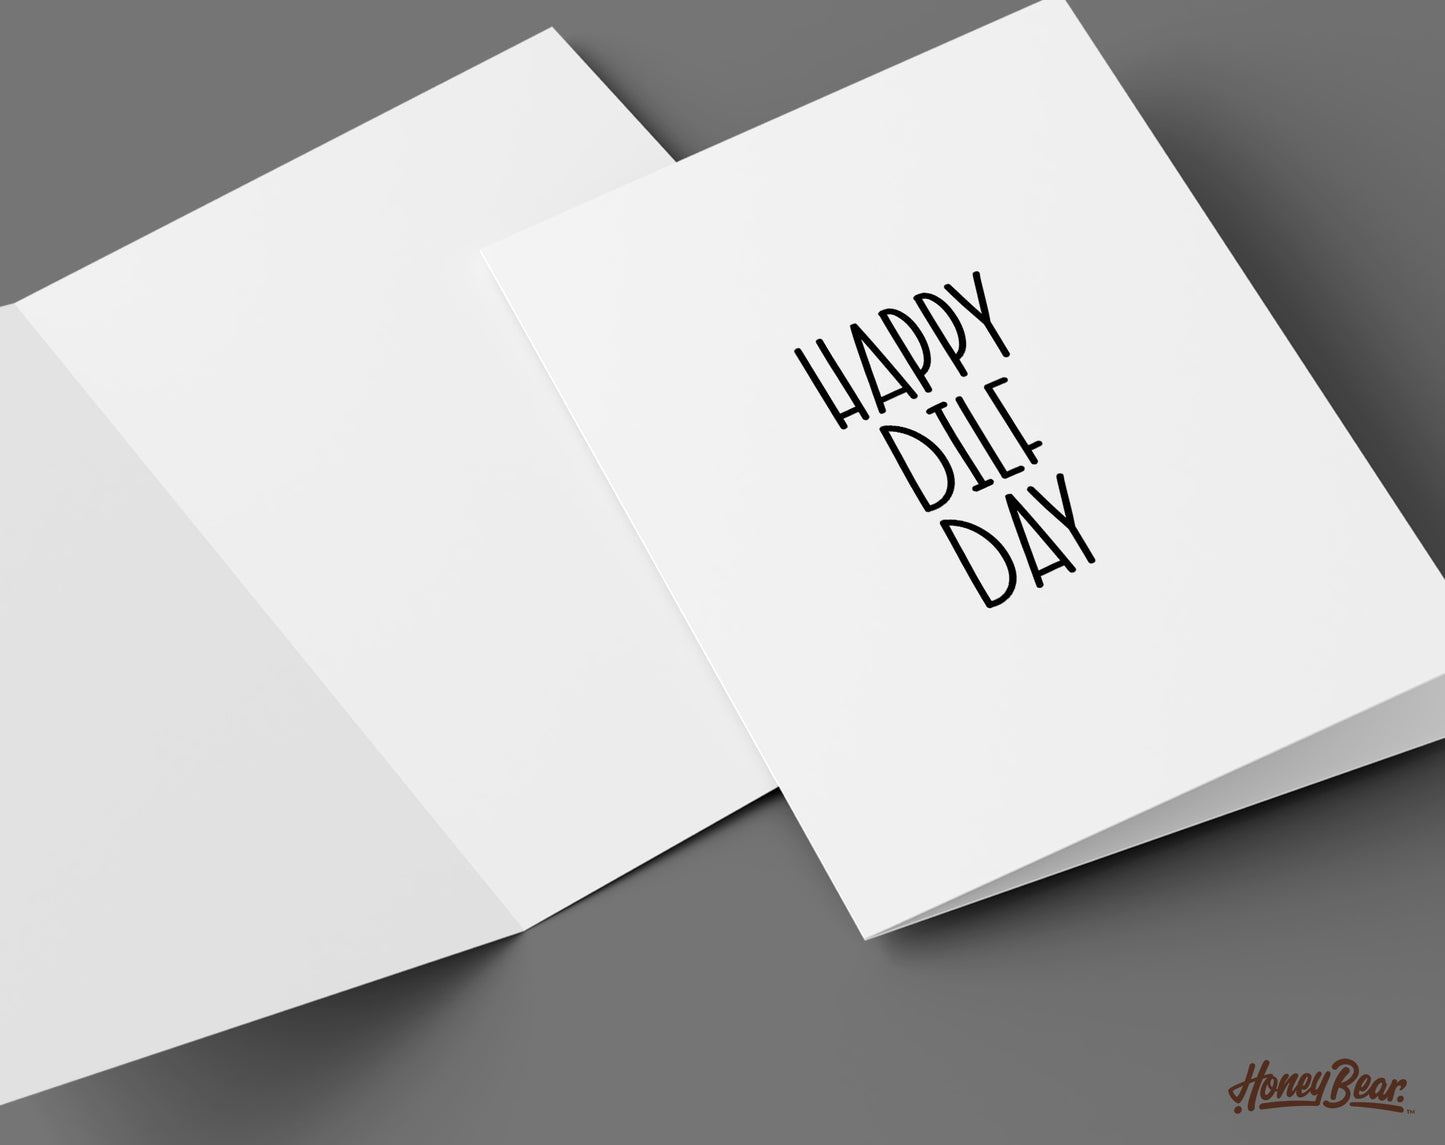 ‘Happy Dilf Day' Father's Day Card